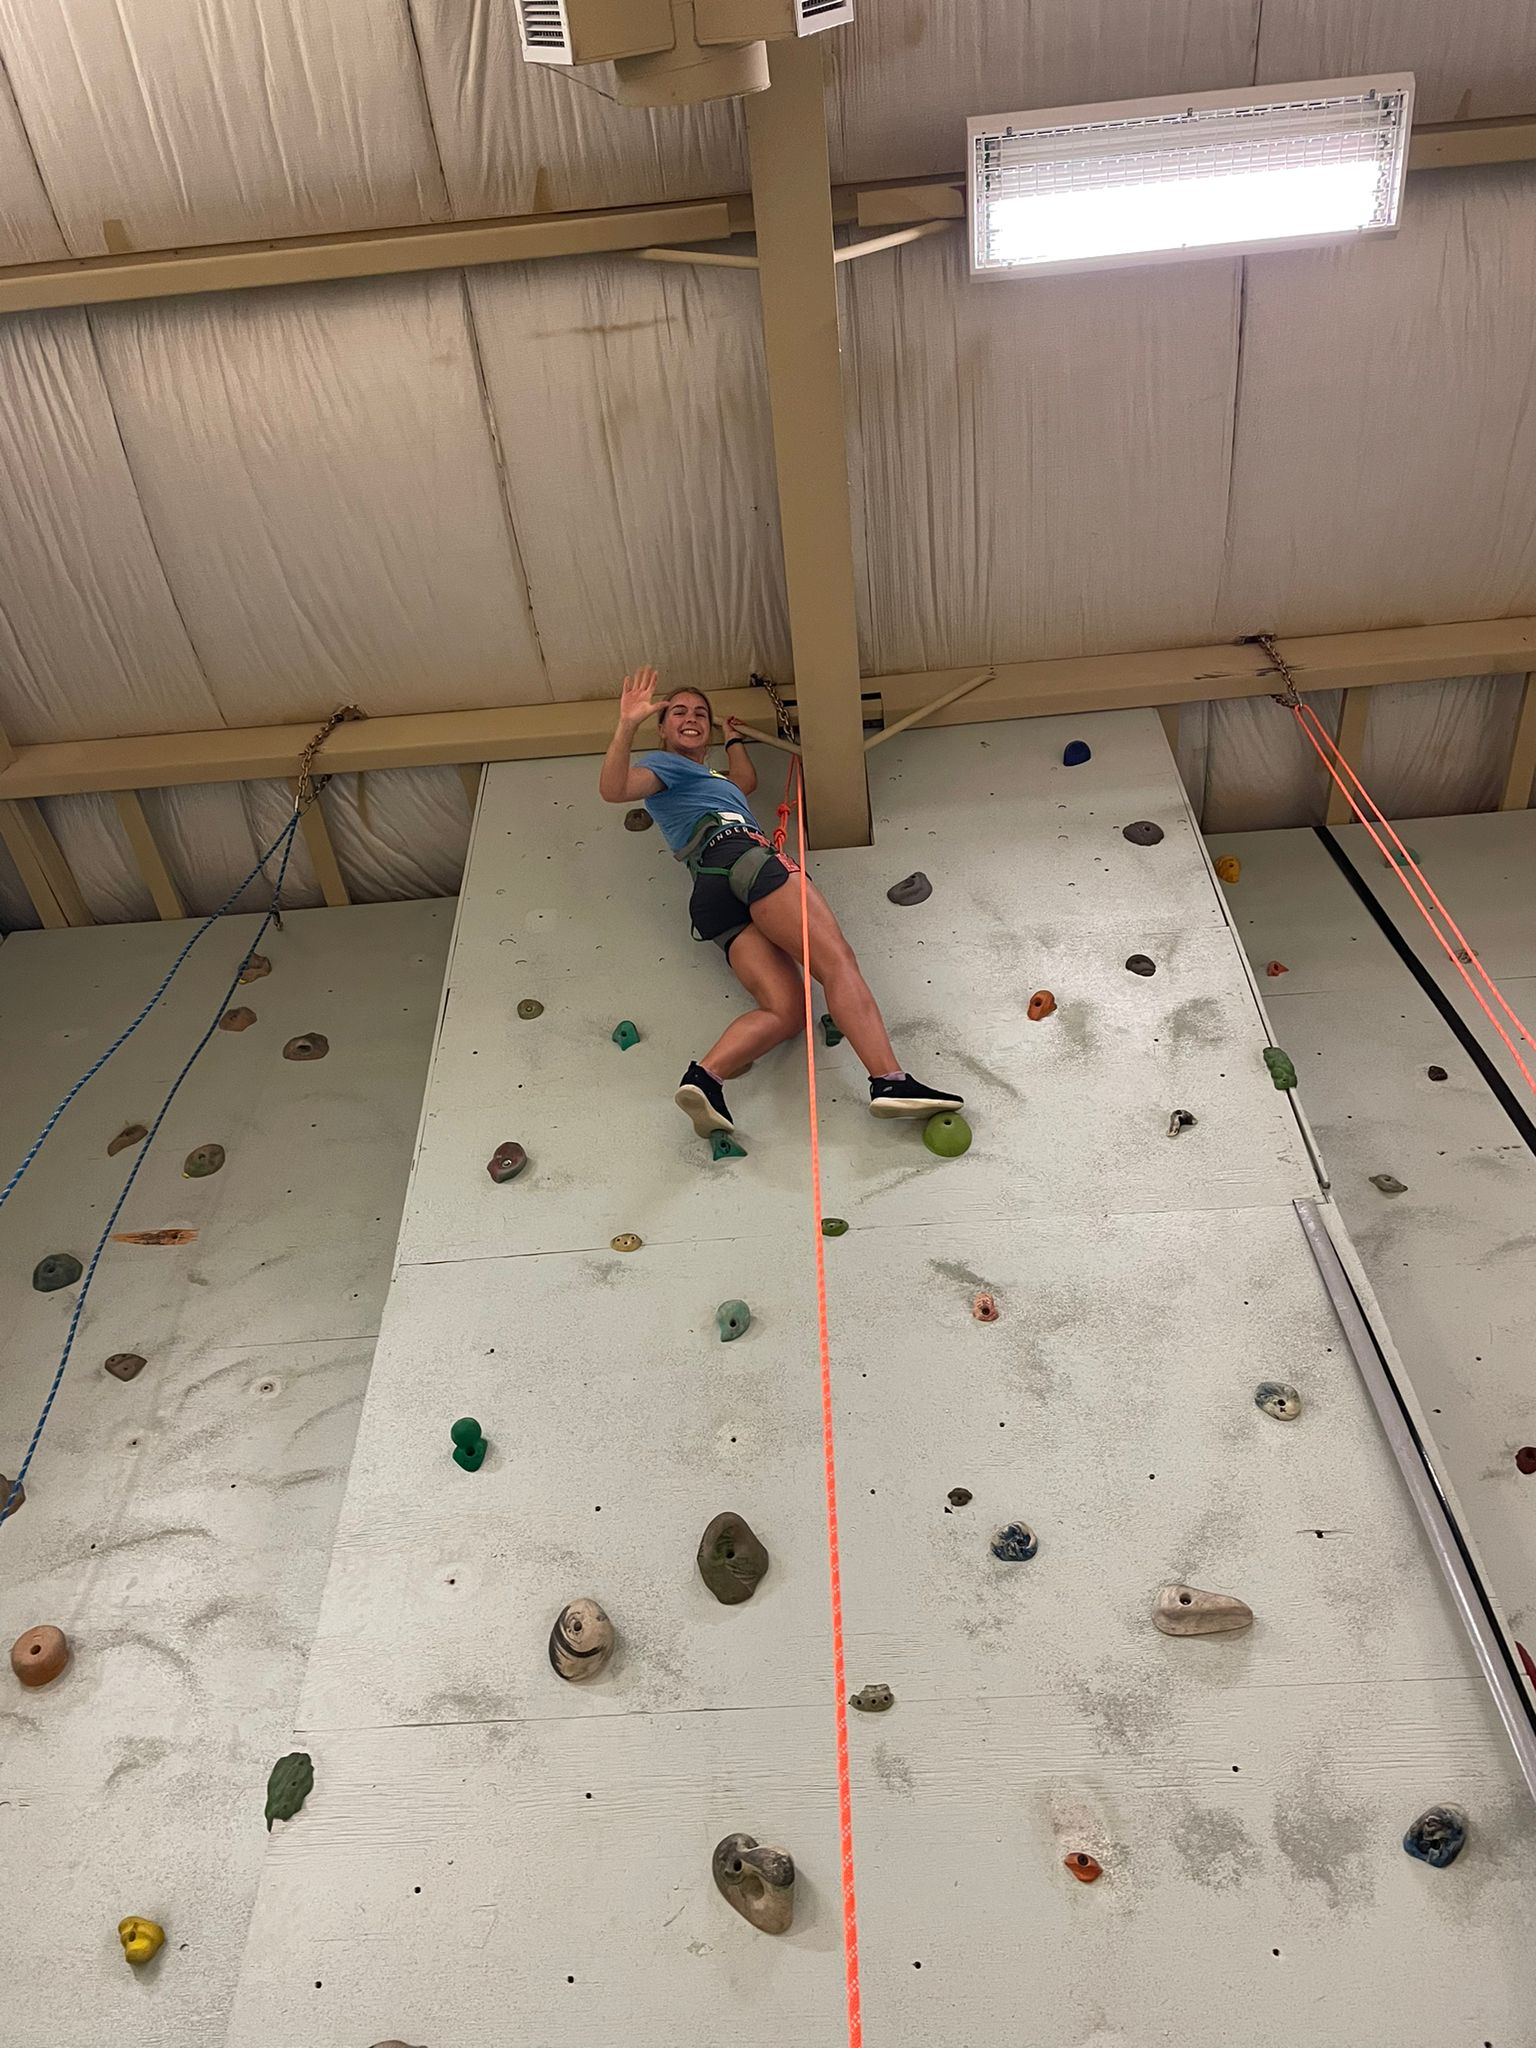 AT the top of the indoor climbing wall